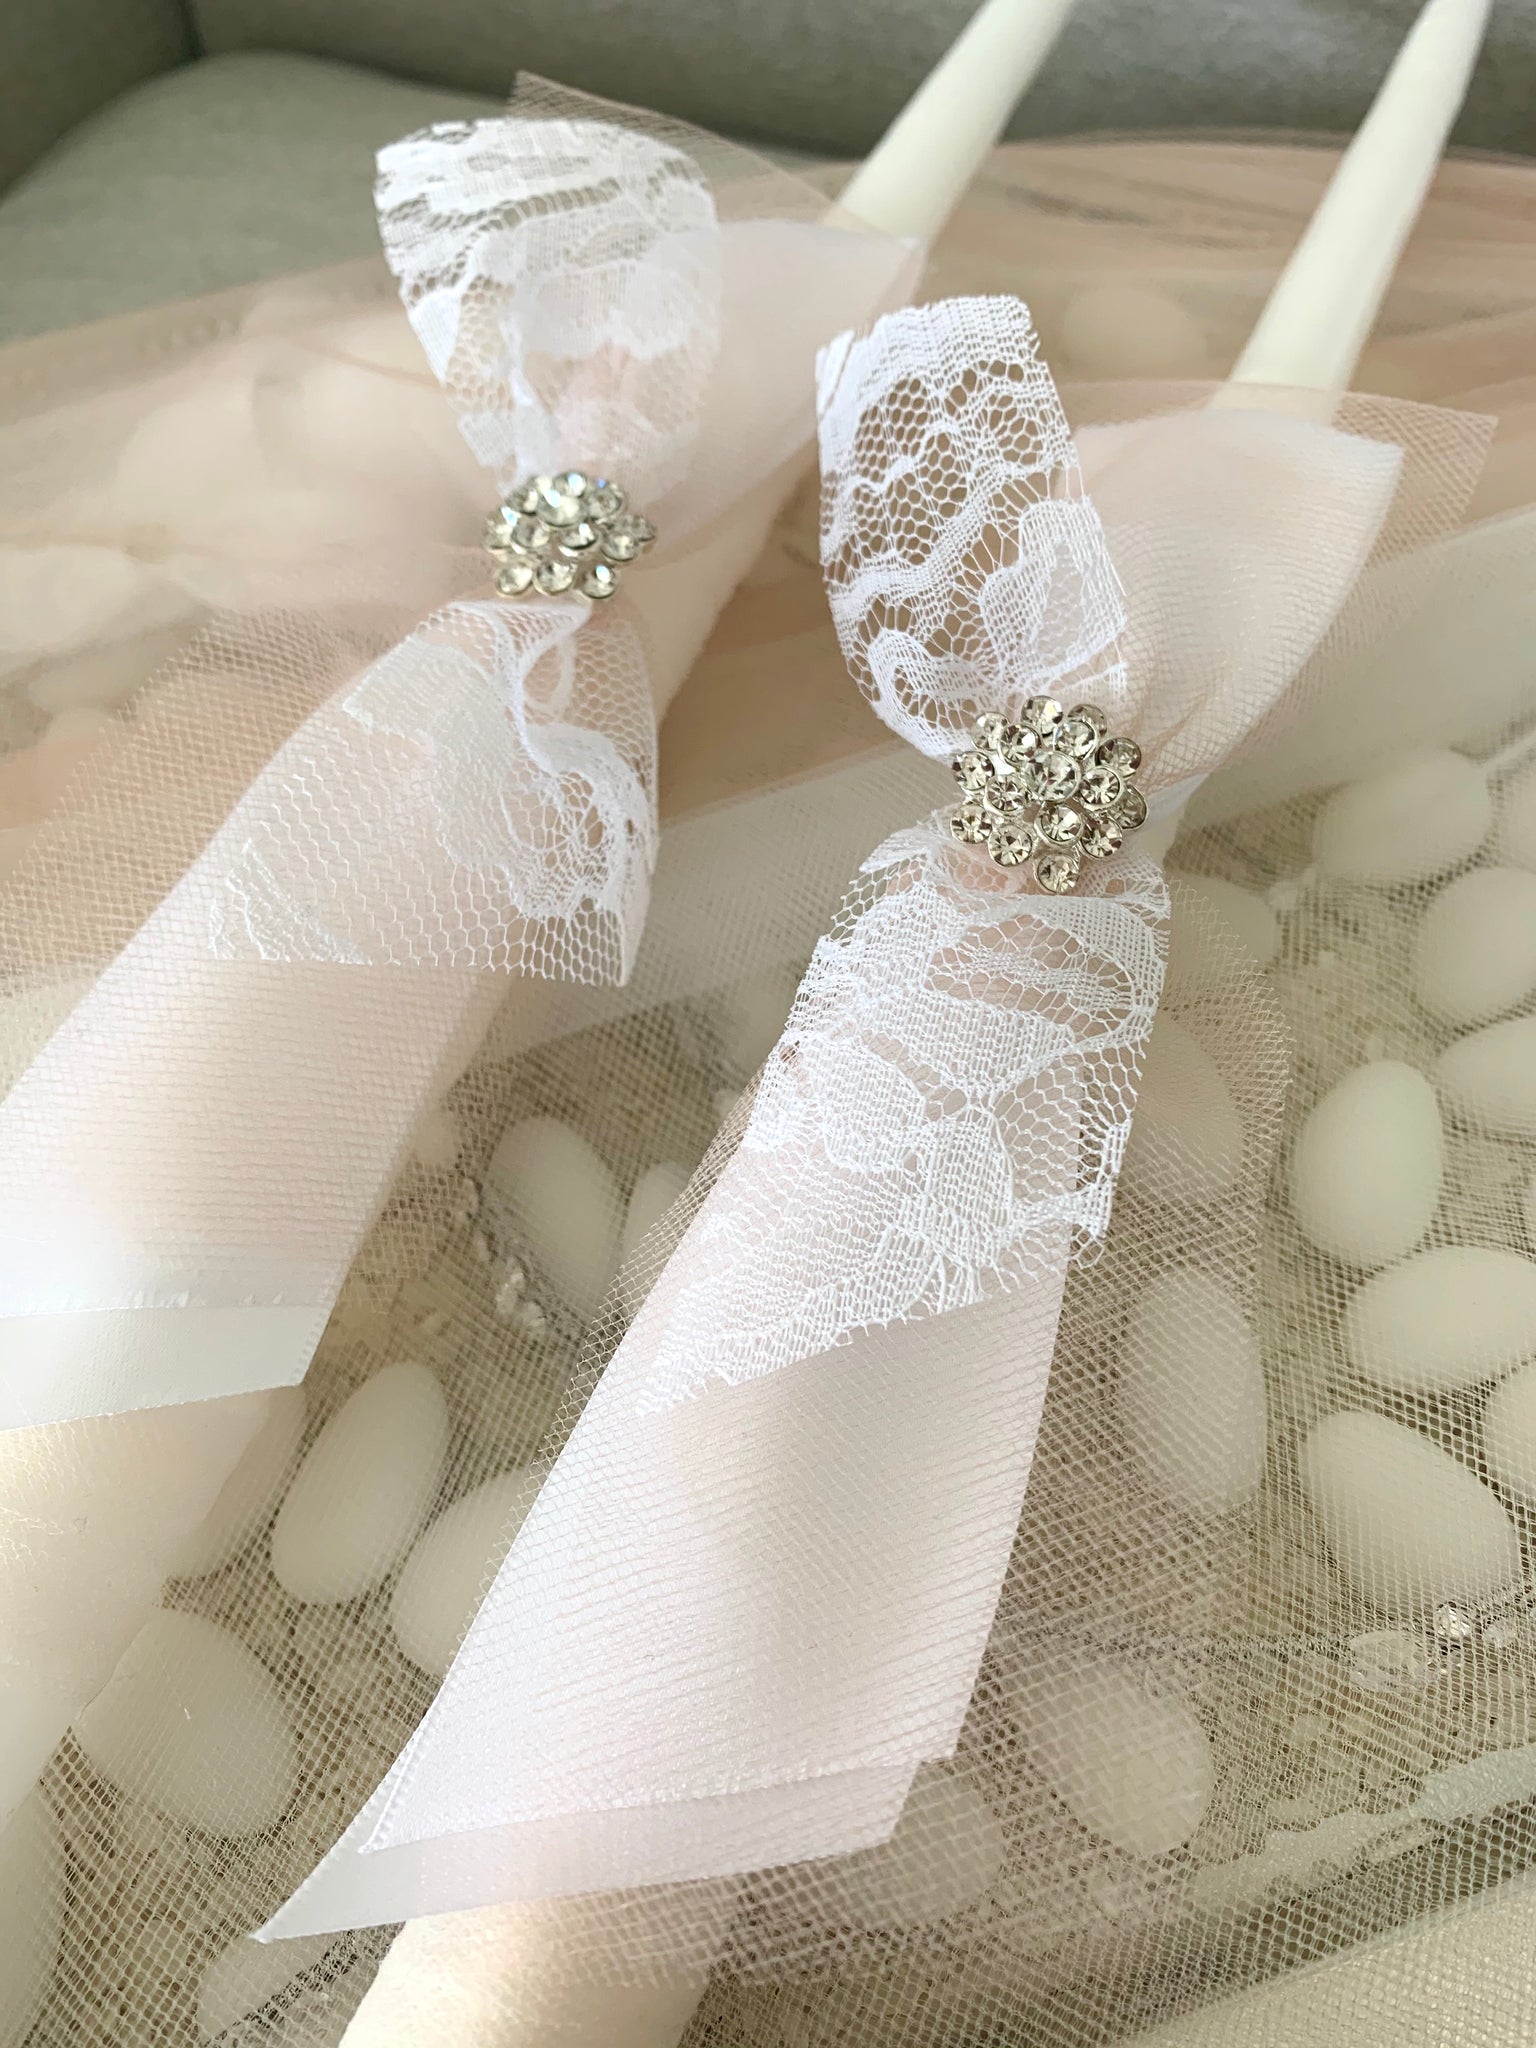 Blush pink and Lace 2 small candles